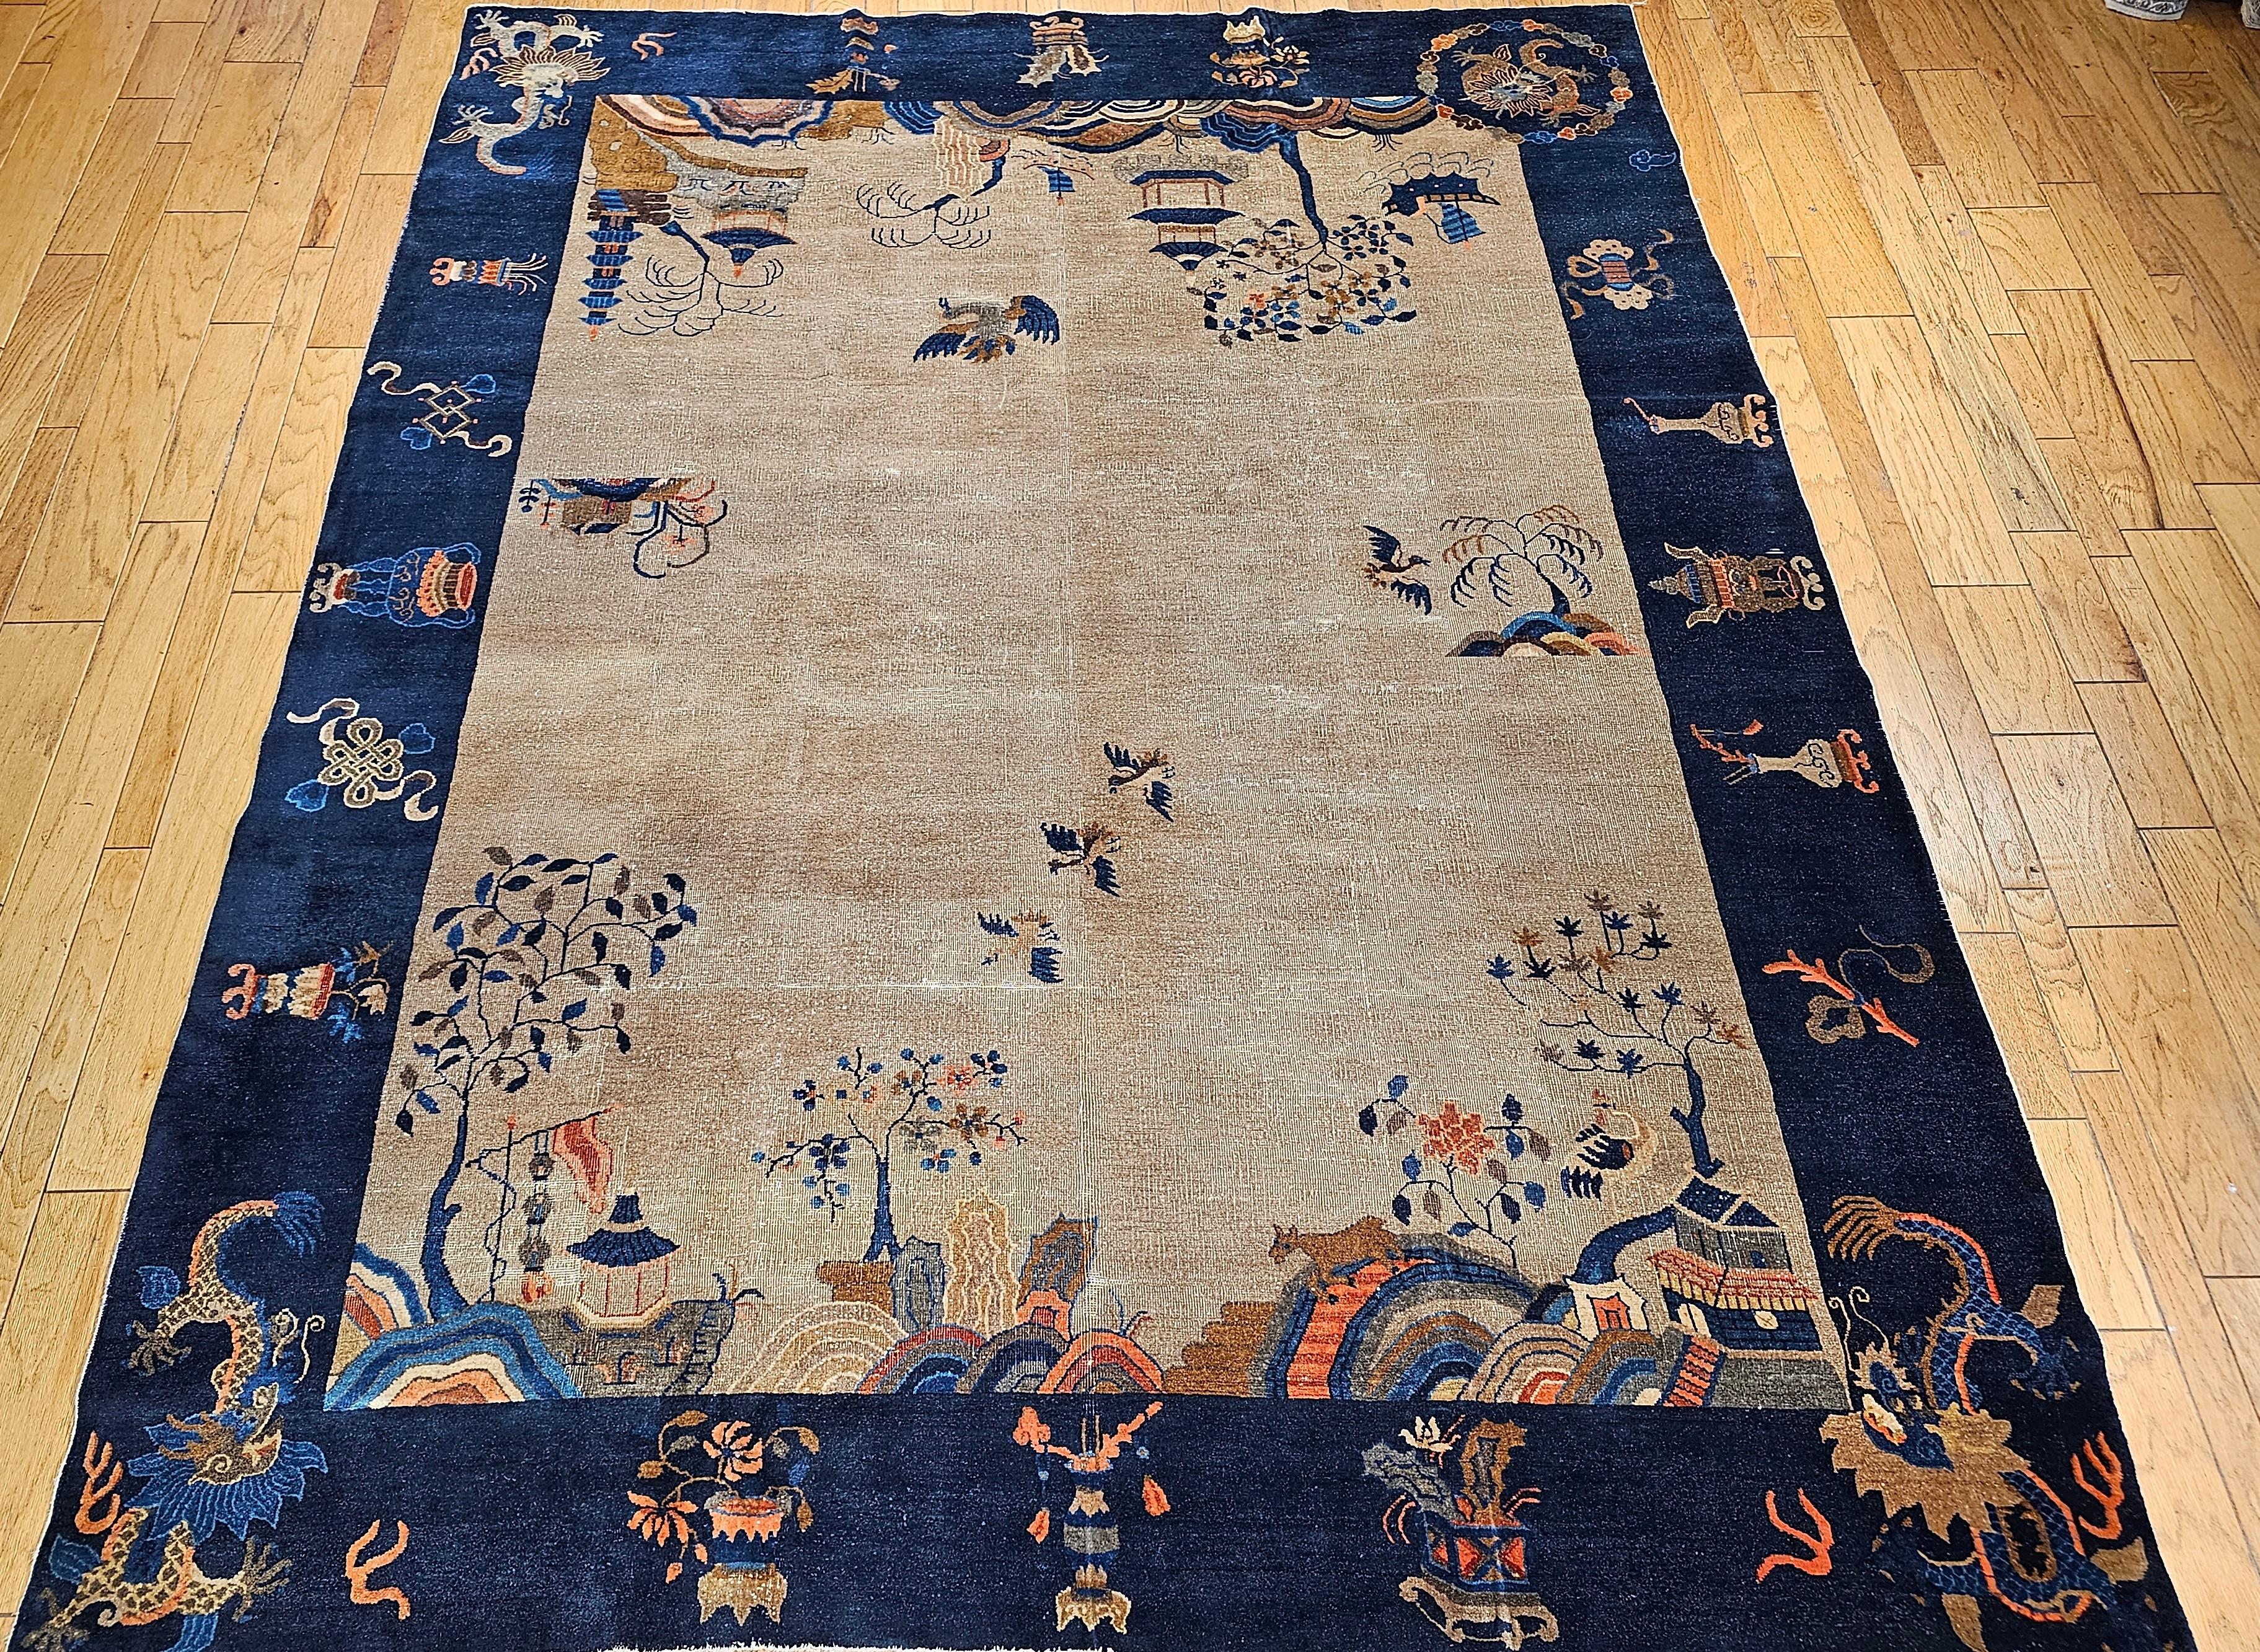  Vintage hand-knotted Chinese Art Deco rug with four dragon designs in the four corners on a light ivory/straw color field with a dark blue border. The rug also has the design of the countryside and mountains including pagodas, birds, rivers and